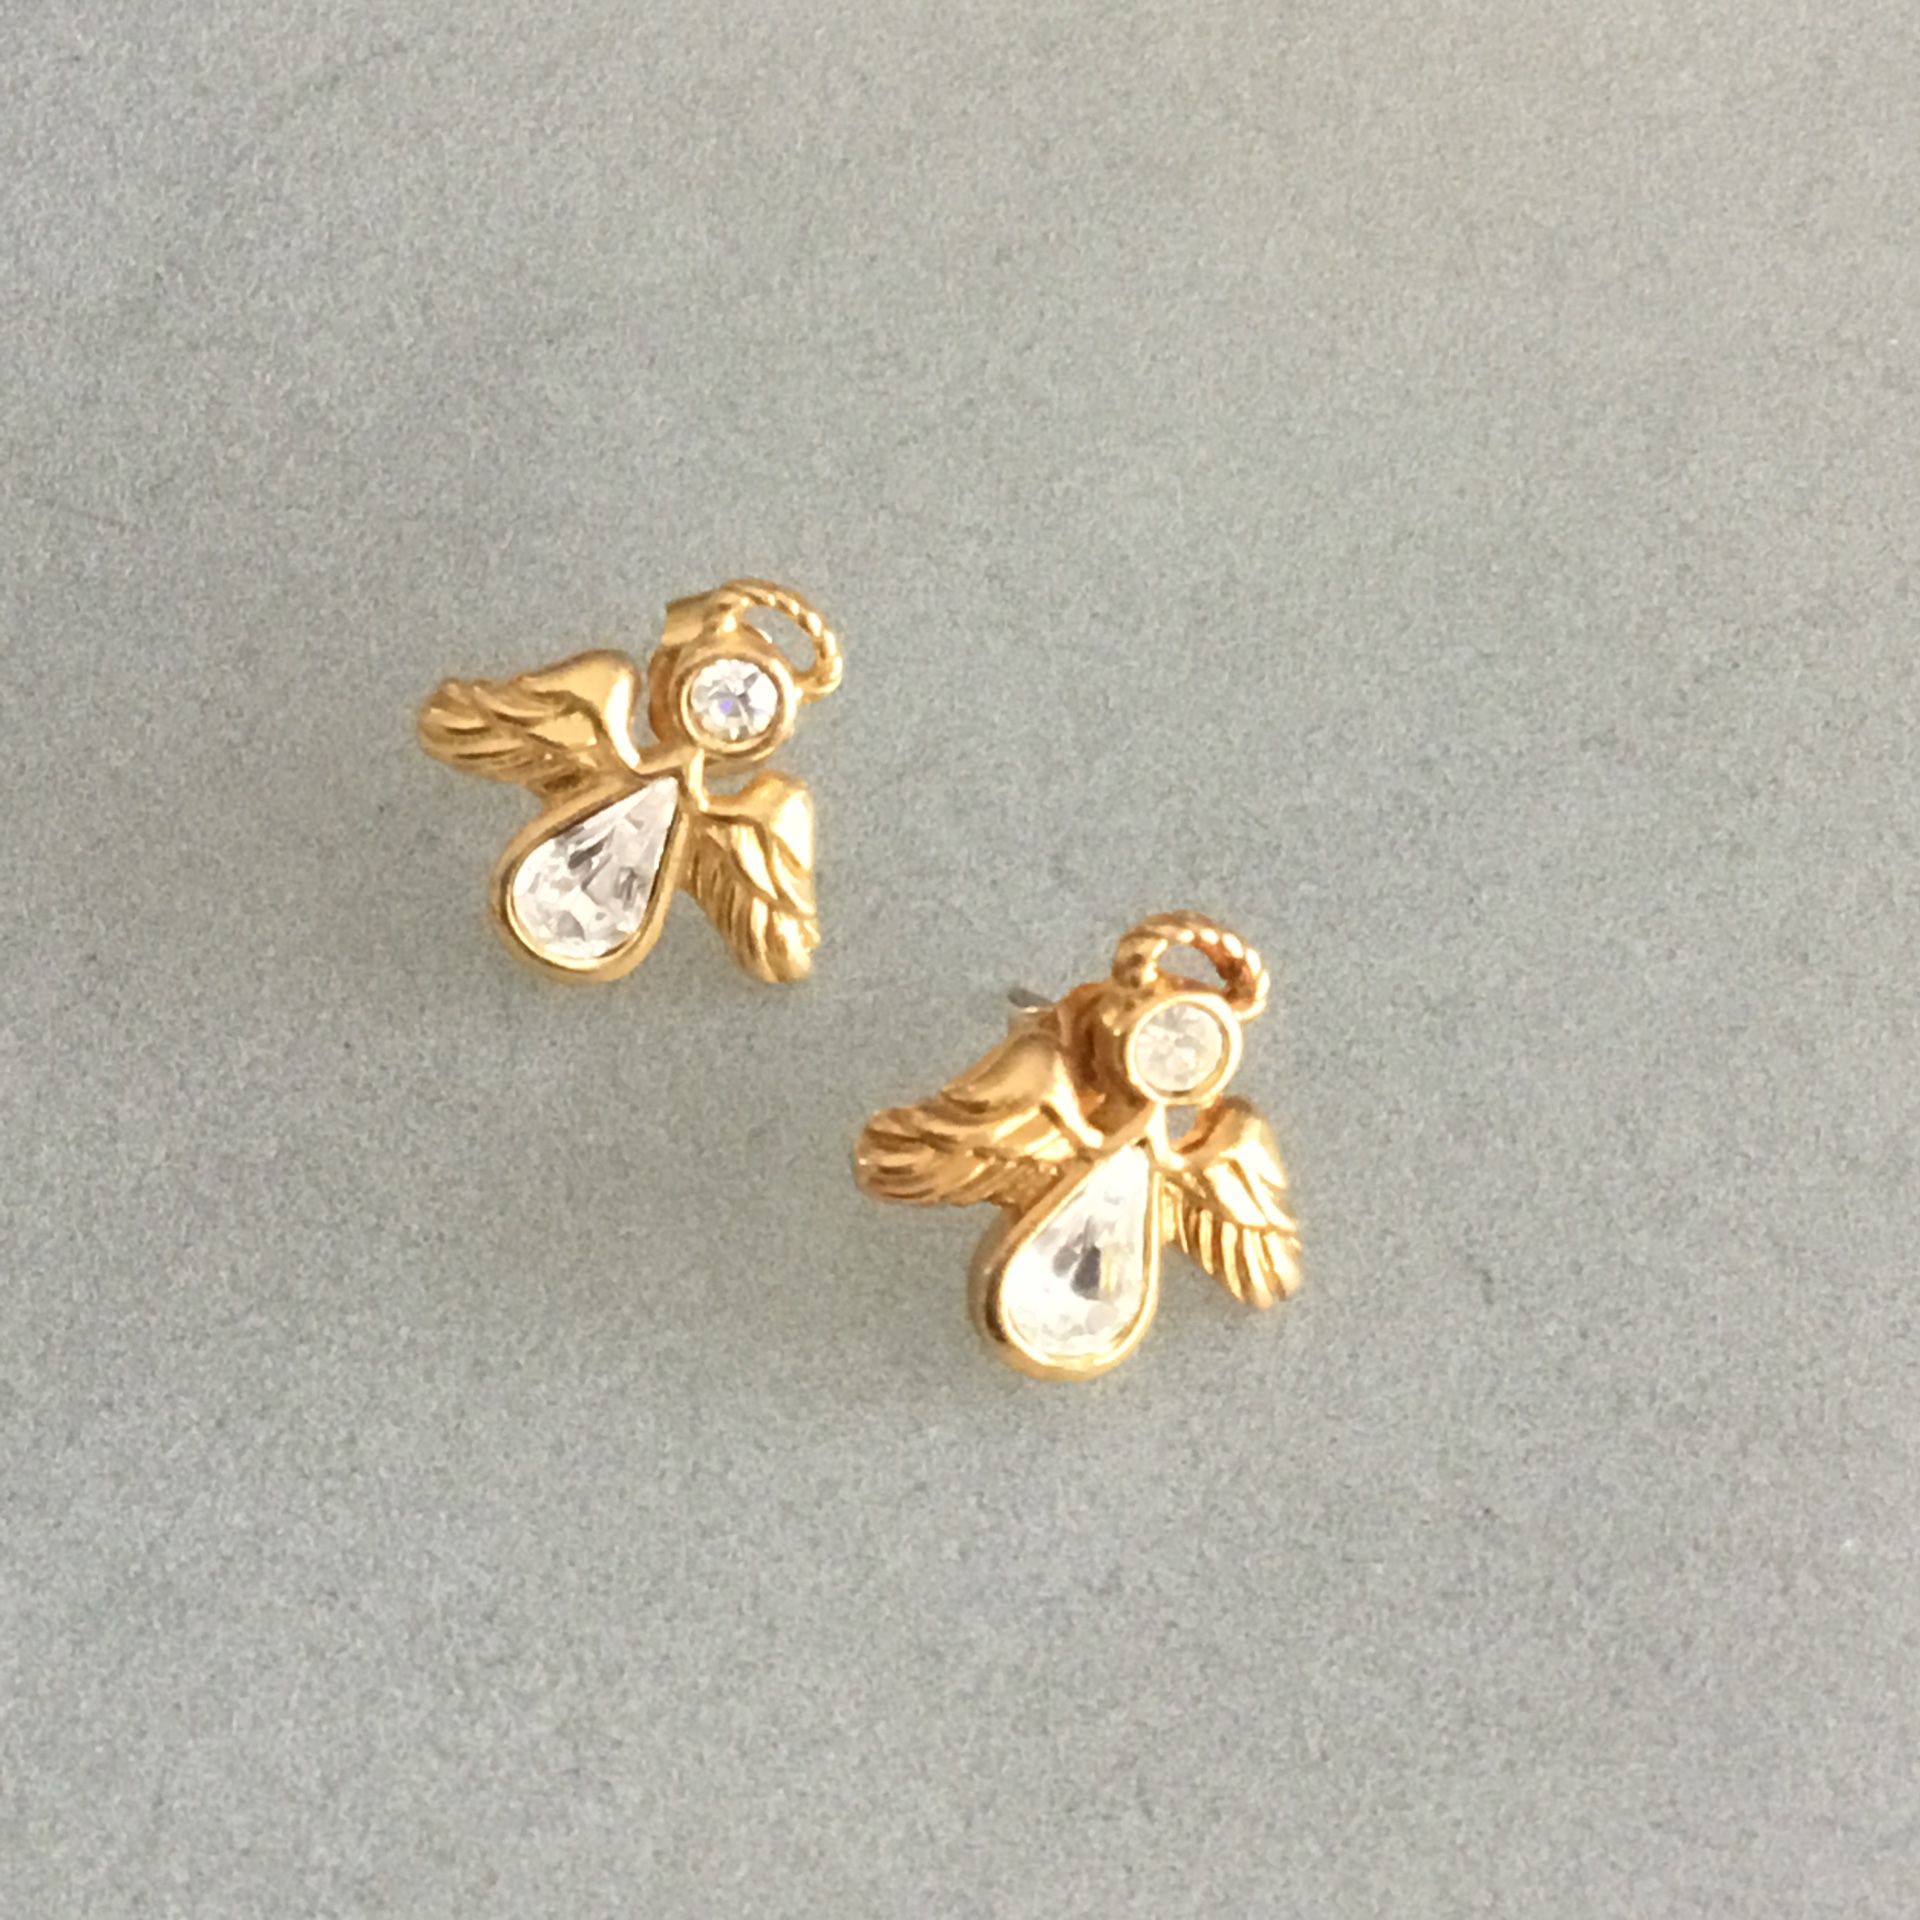 Signed Avon Gold Tone Post Pierced Earrings Angel Shaped With Clear Stone